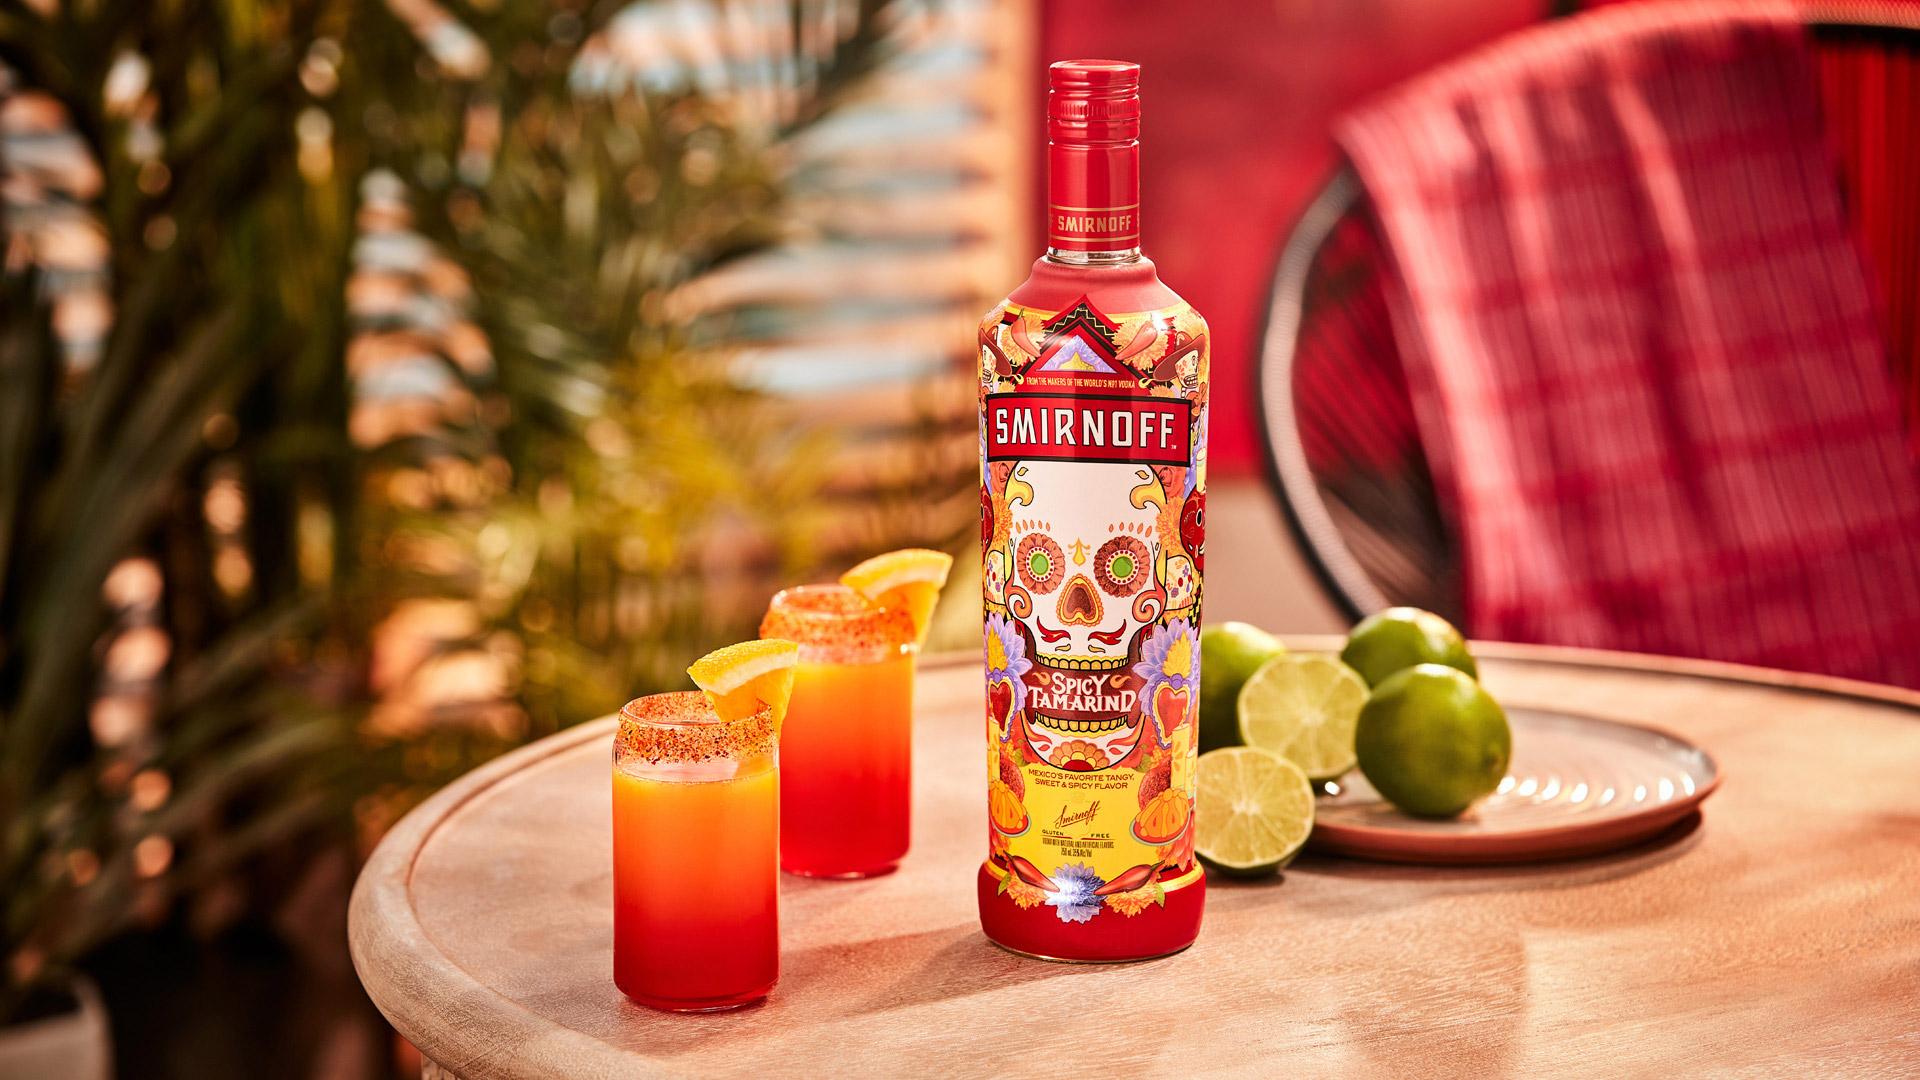 Smirnoff Spicy Tamarind vodka bottle alongside two orange and red colored Real Macoy Chamoy cocktails  with a spicy seasoning rim and orange wedge garnish. 